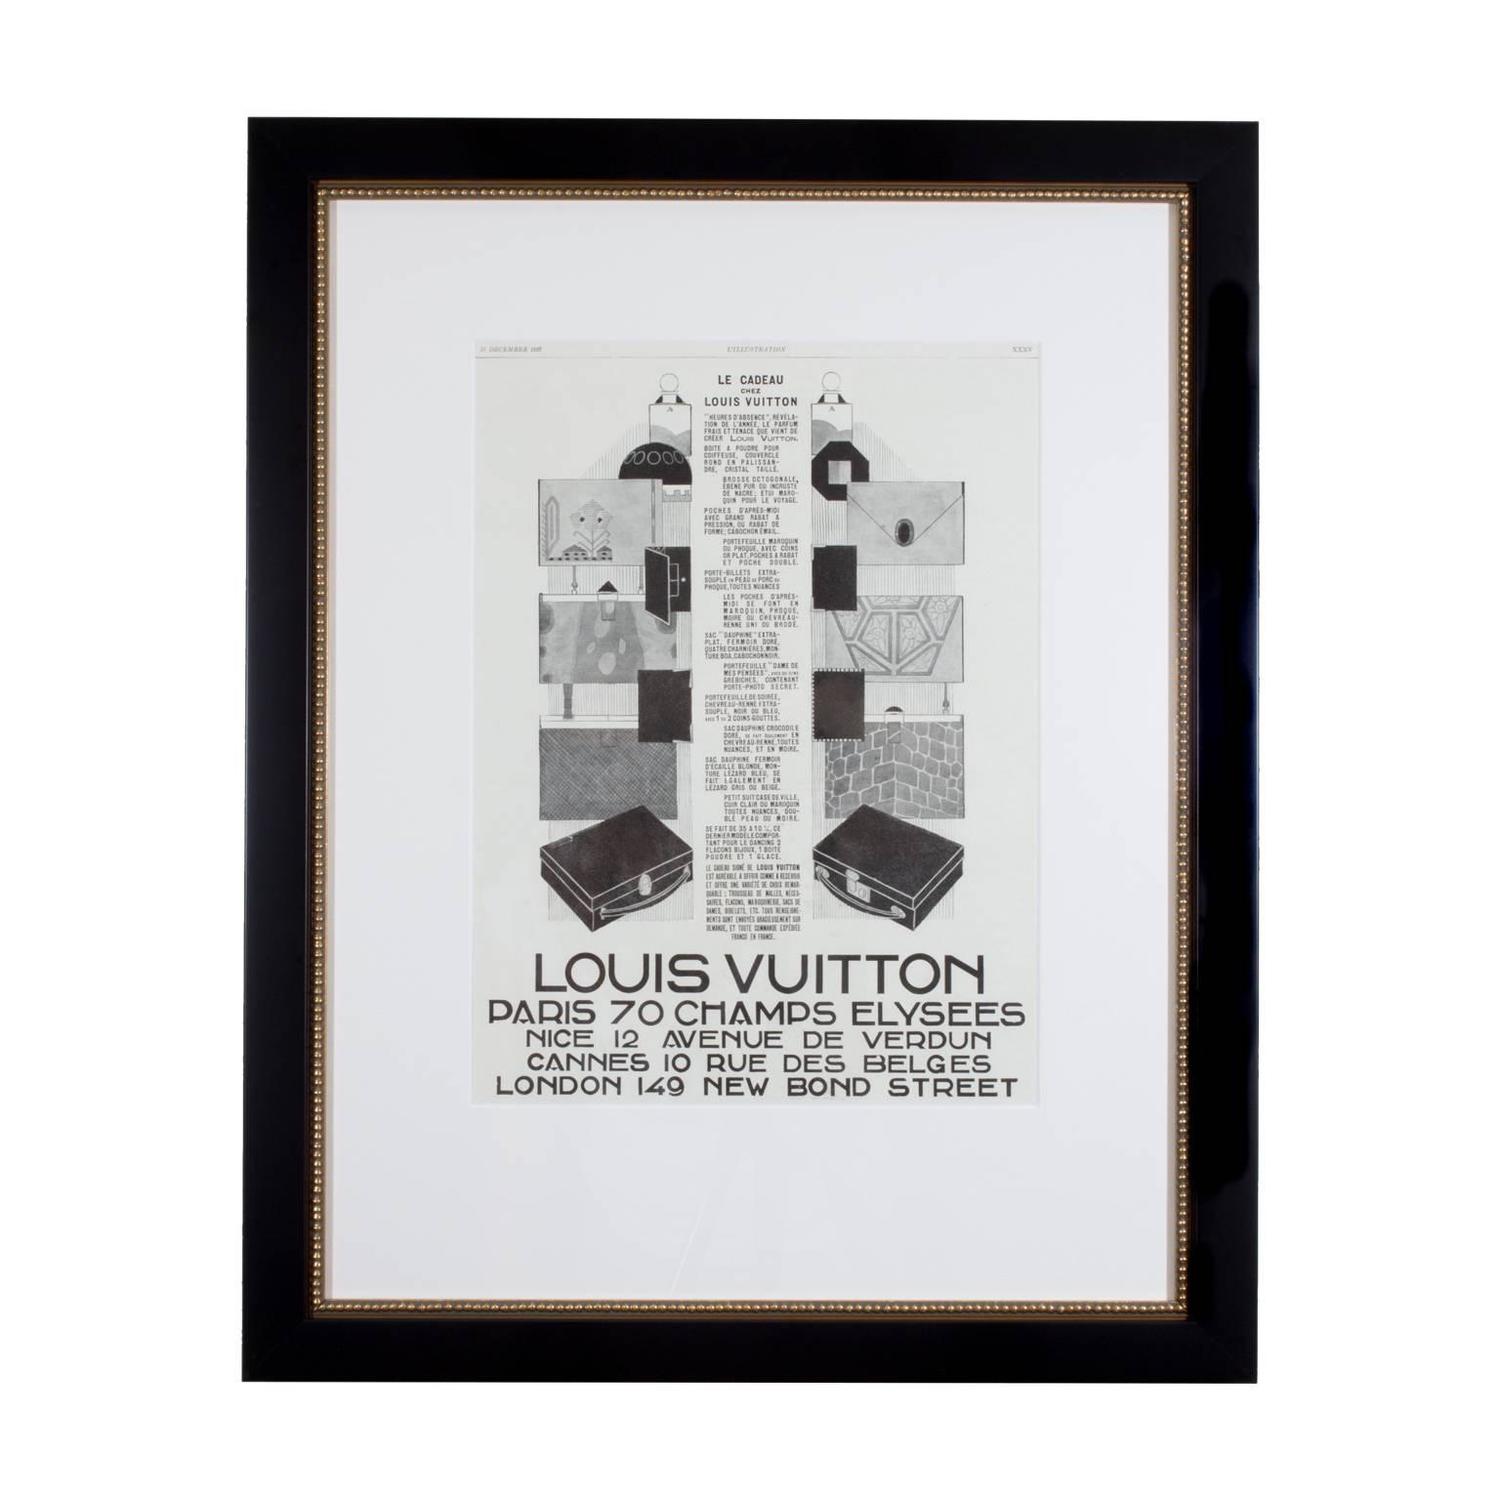 Original Vintage French Framed Louis Vuitton Ad from the 1930&#39;s For Sale at 1stdibs